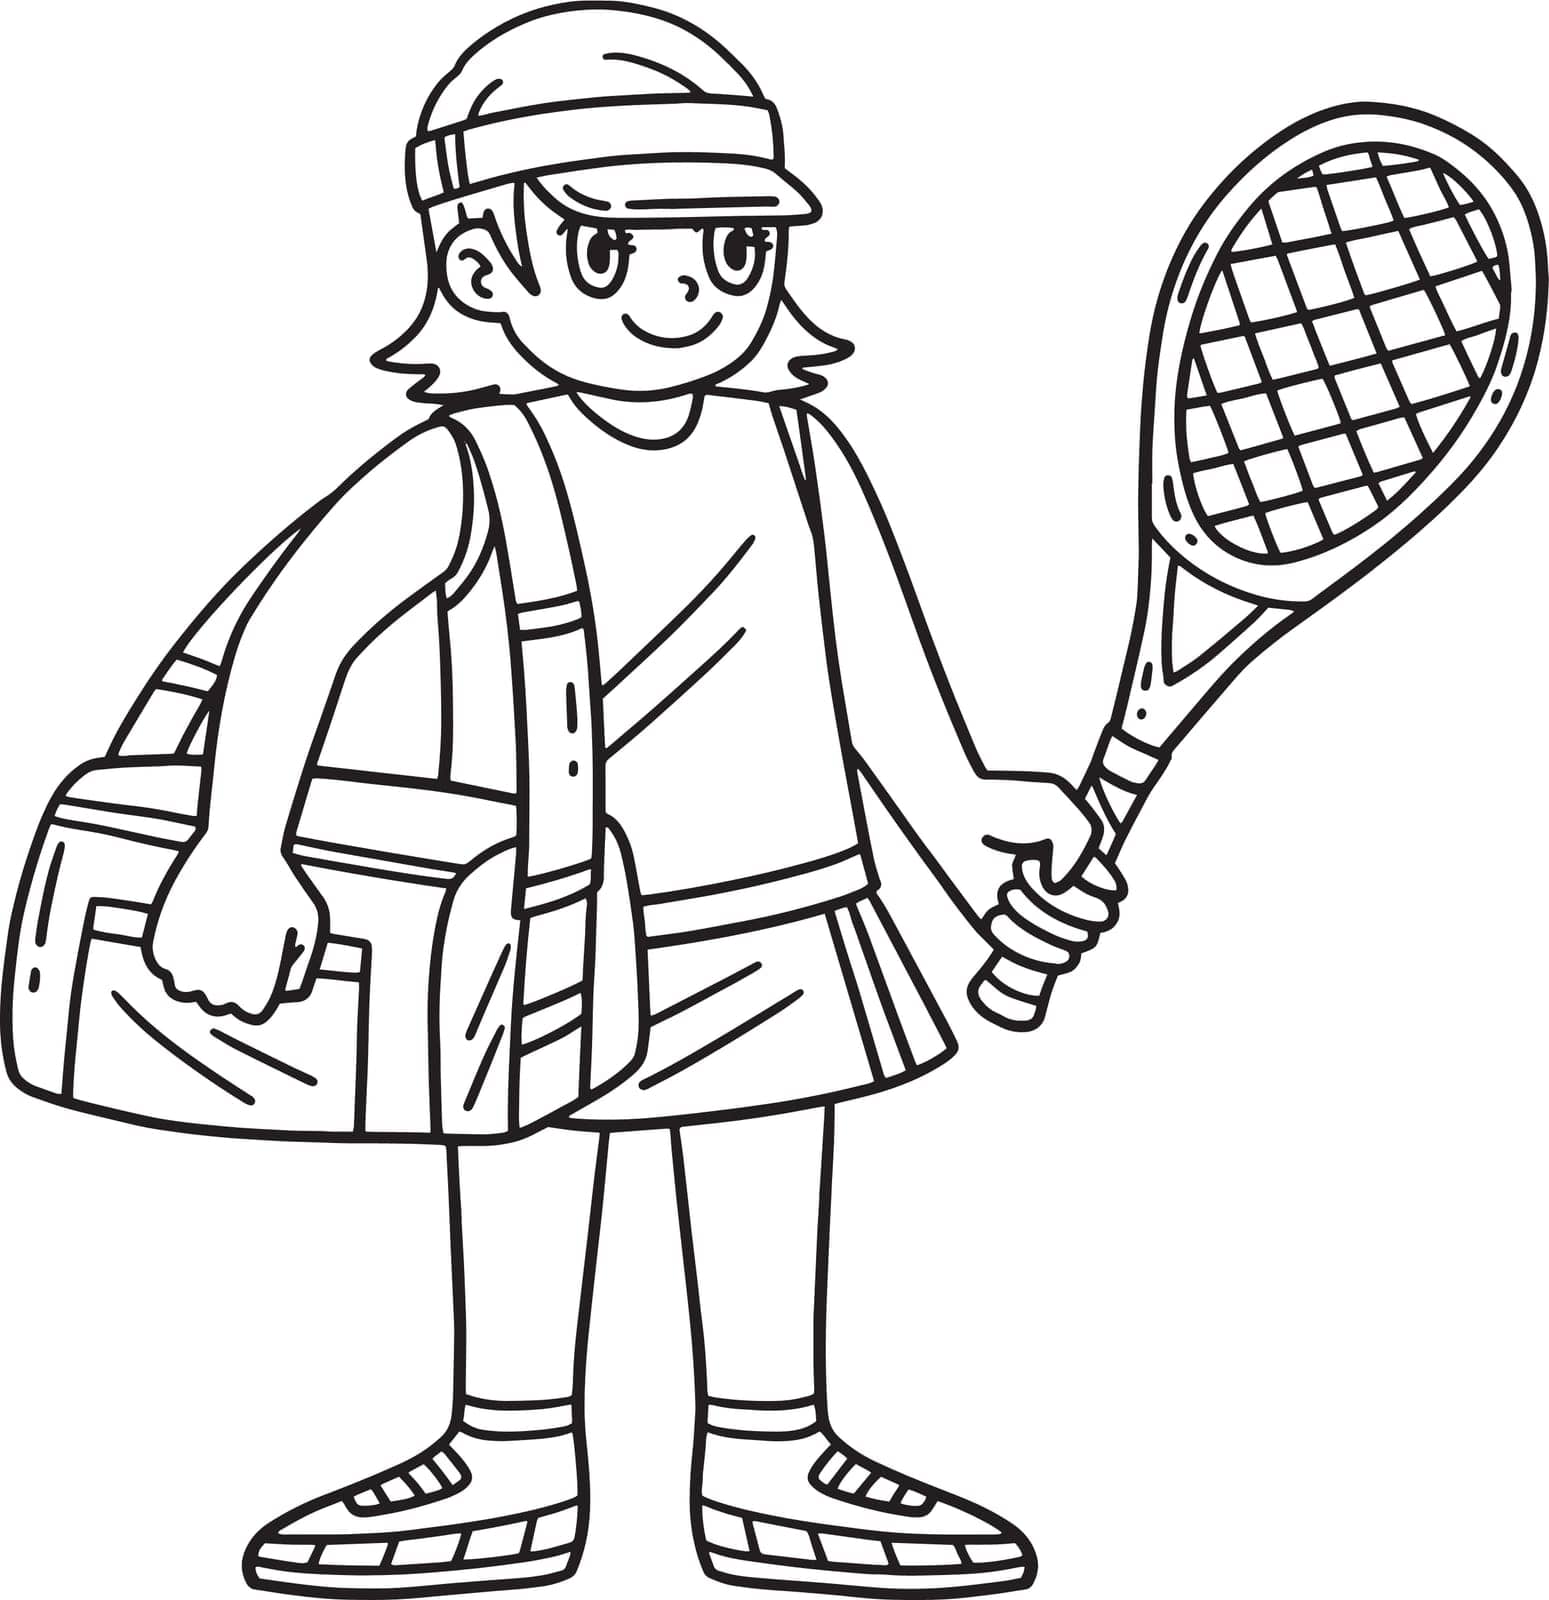 Tennis Female Player with Bag and Racket Isolated by abbydesign